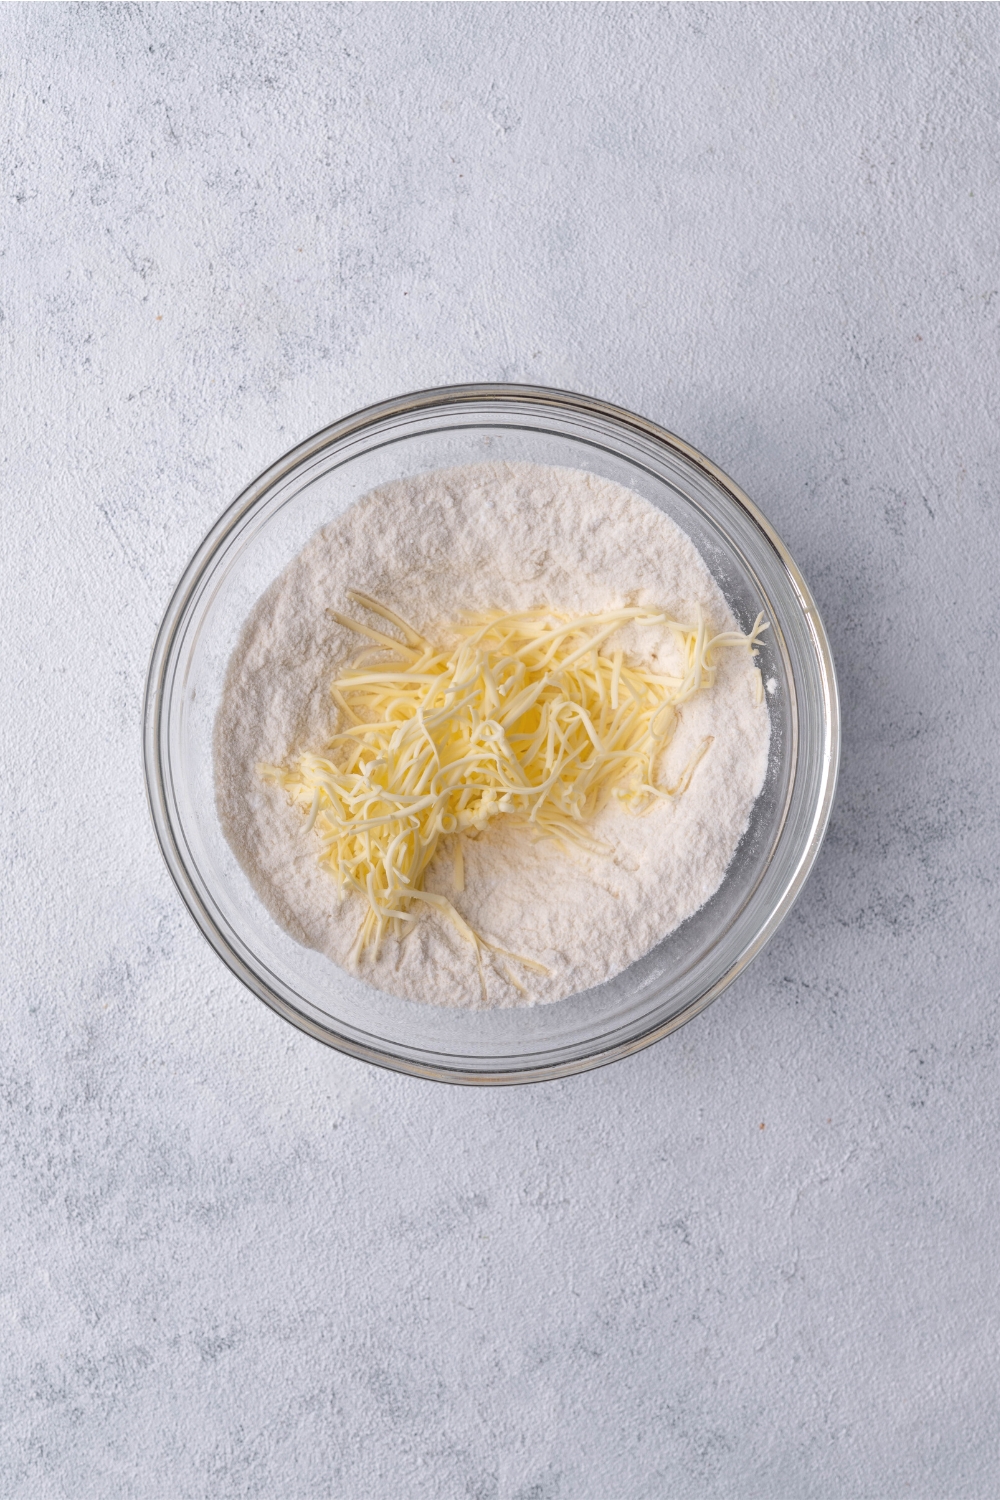 Grated butter on top of flour in a glass bowl.